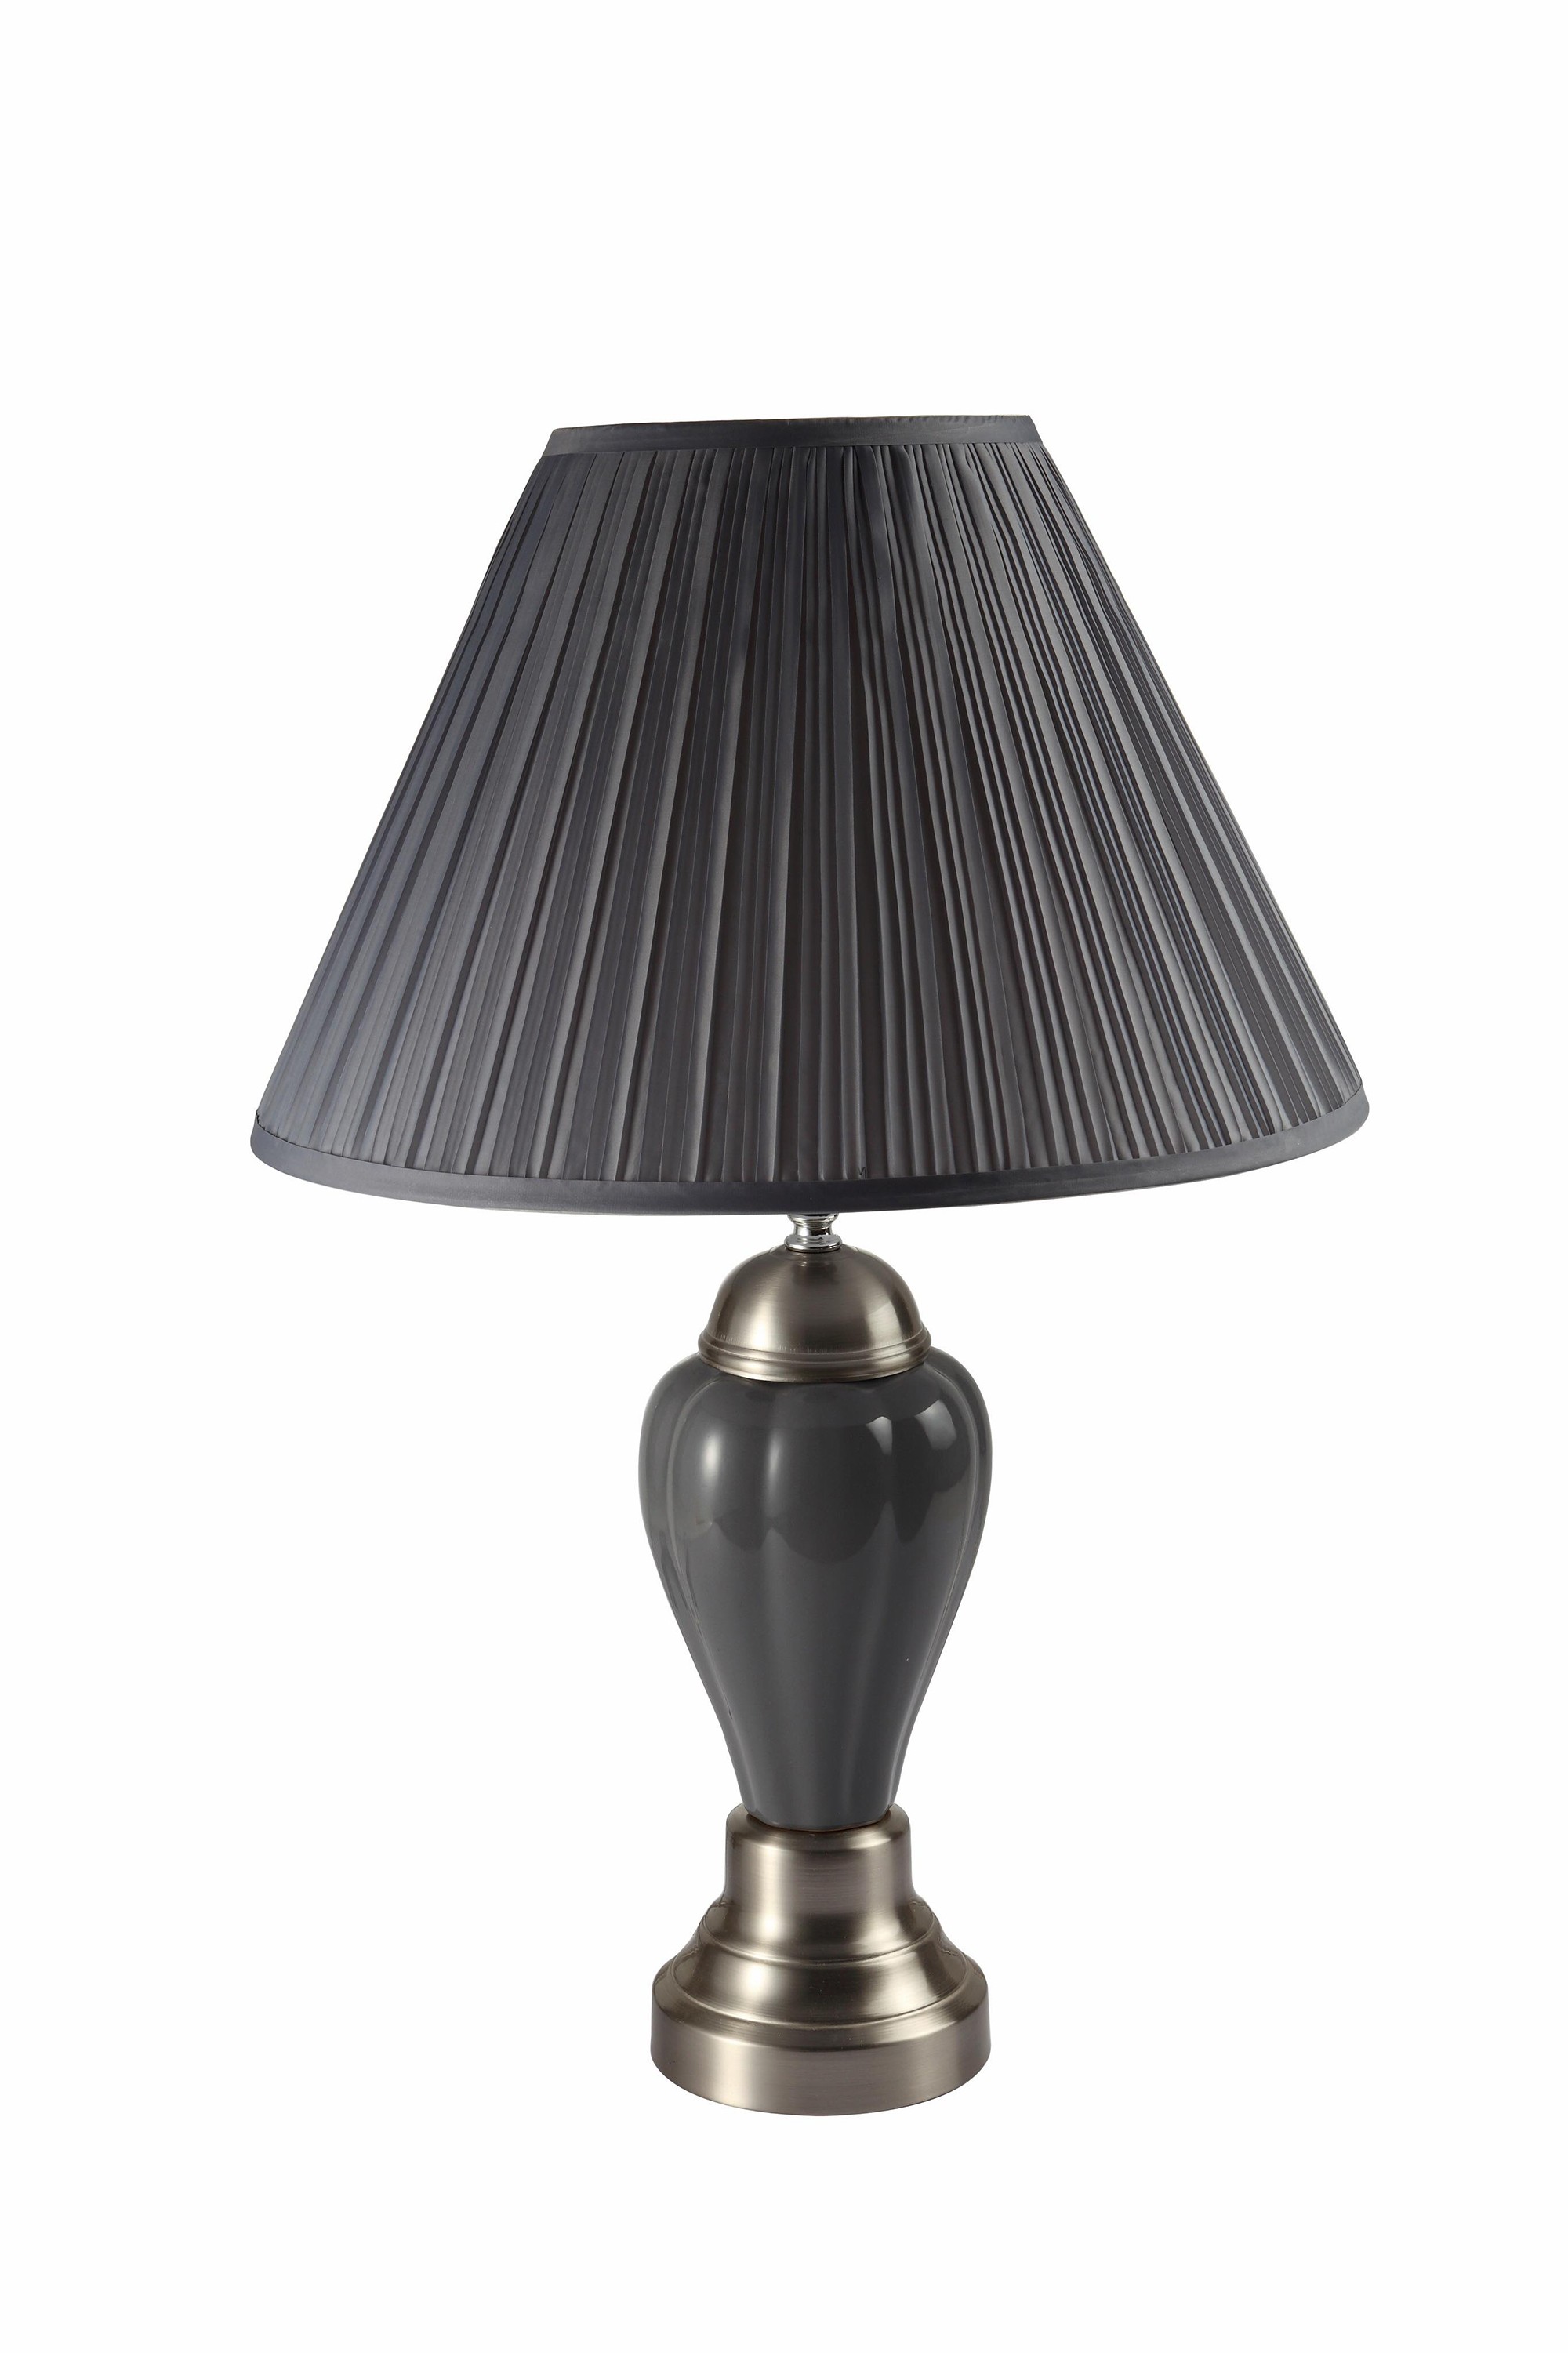 27" Gray Metal Bedside Table Lamp With Gray Shade-468530-1